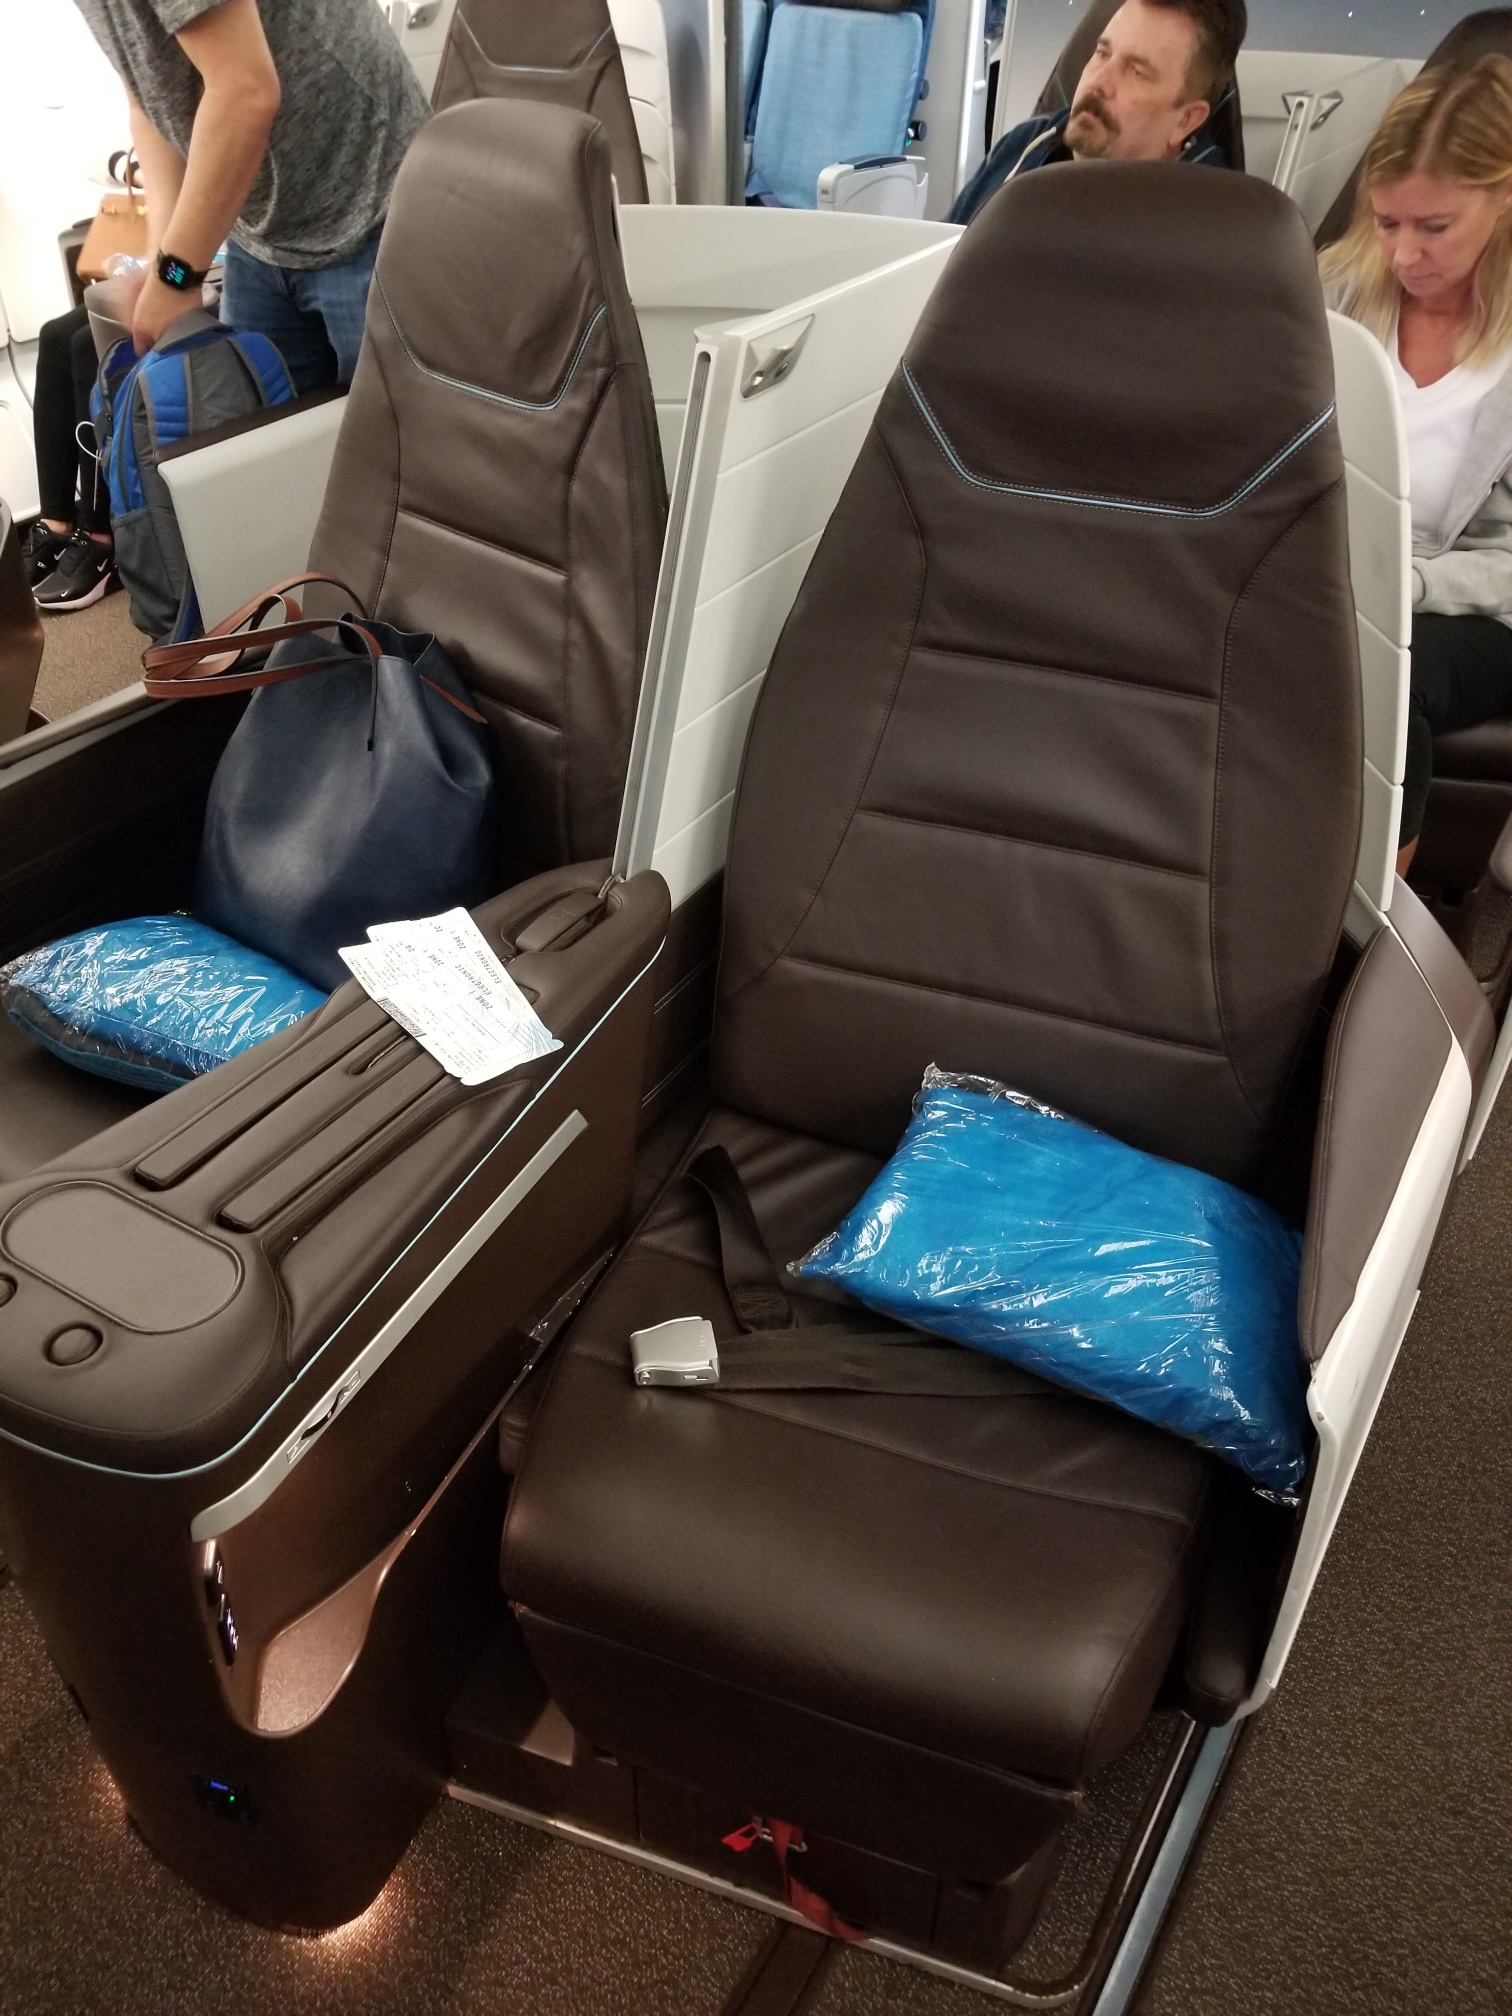 hawaiian airlines seat assignments